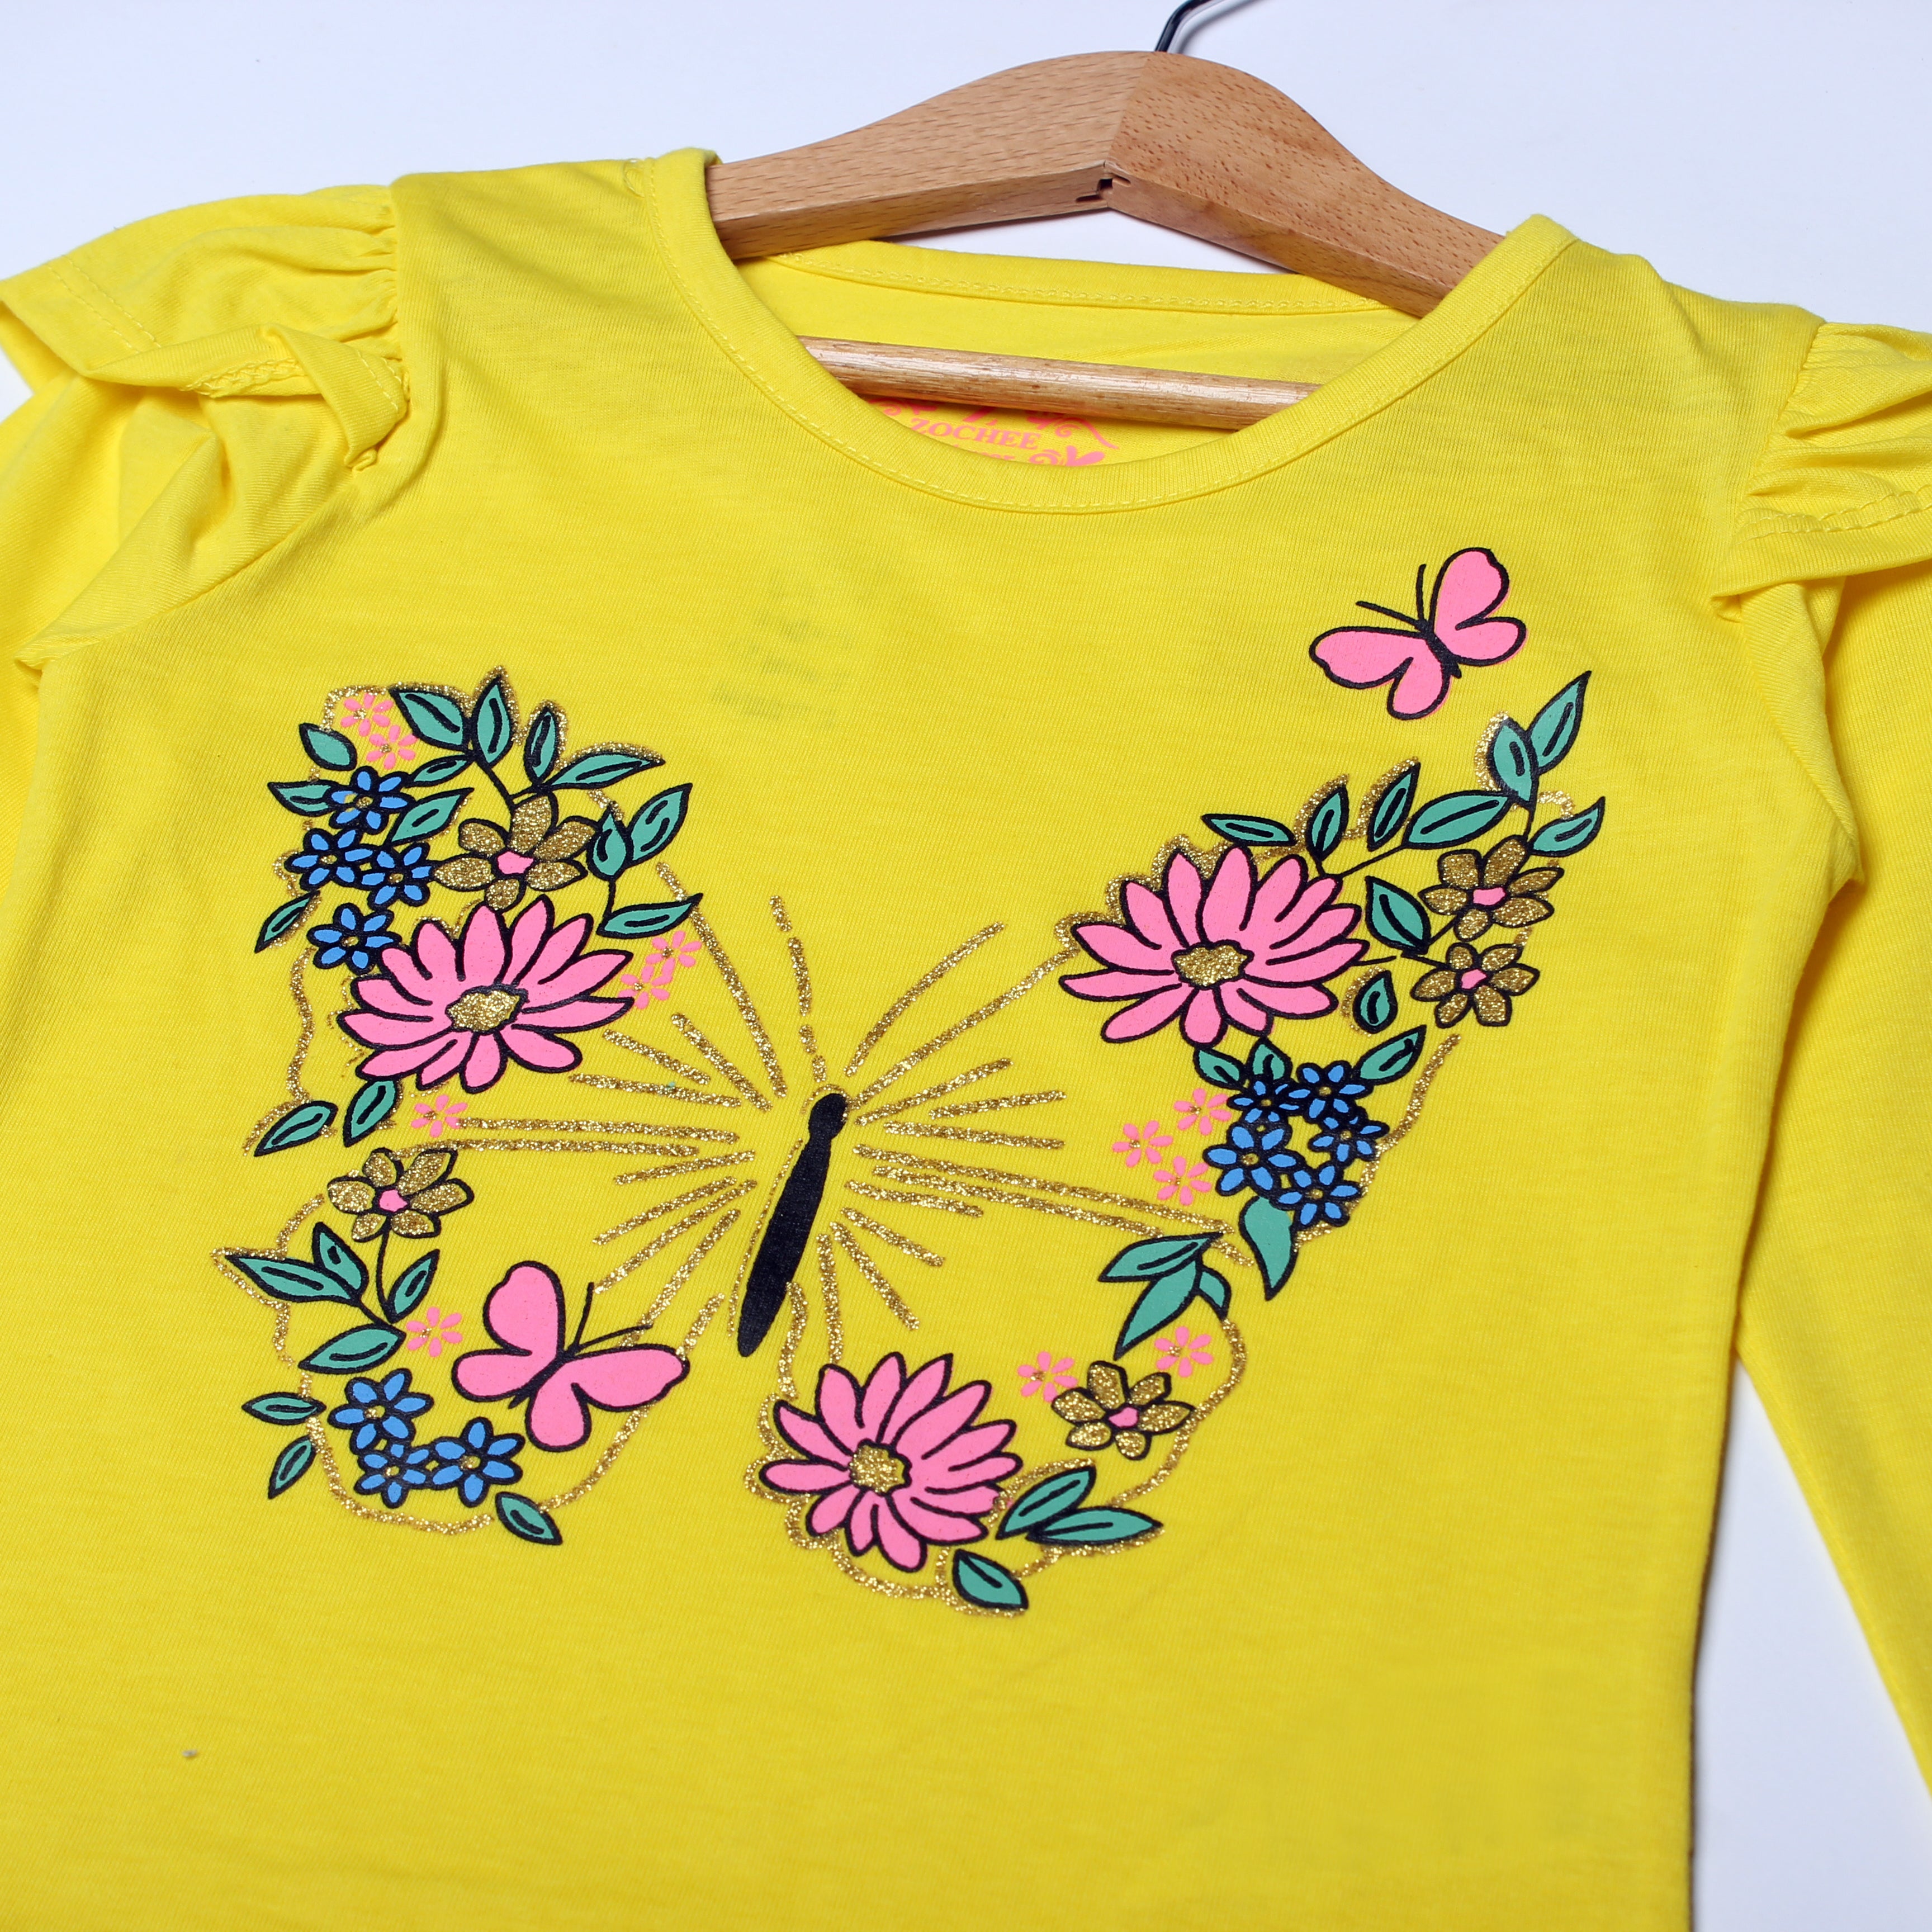 YELLOW FULL SLEEVES BUTTERFLY PRINTED TOP FOR GIRLS